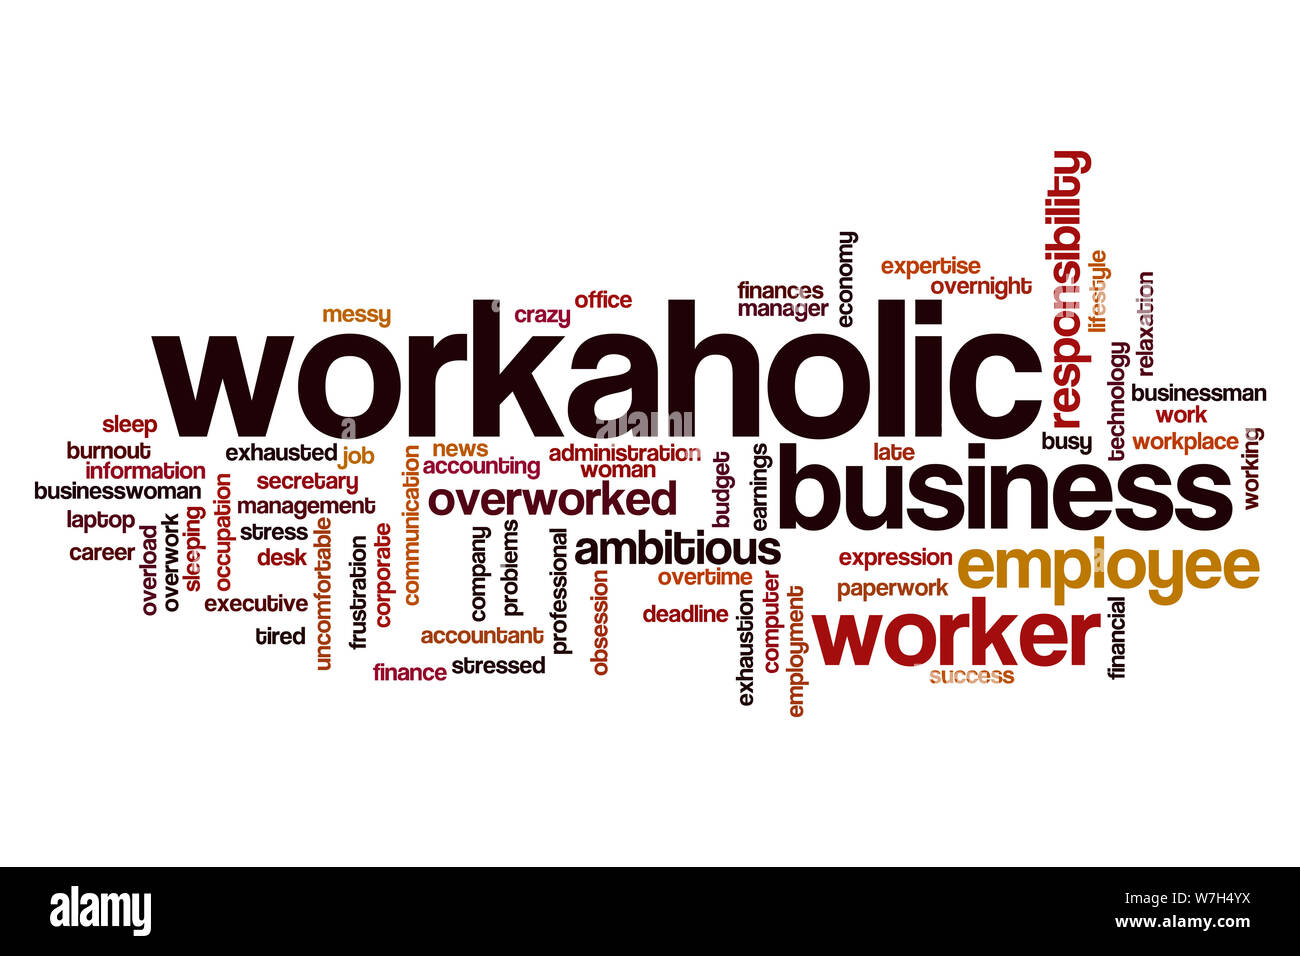 Workaholic word cloud Stock Photo